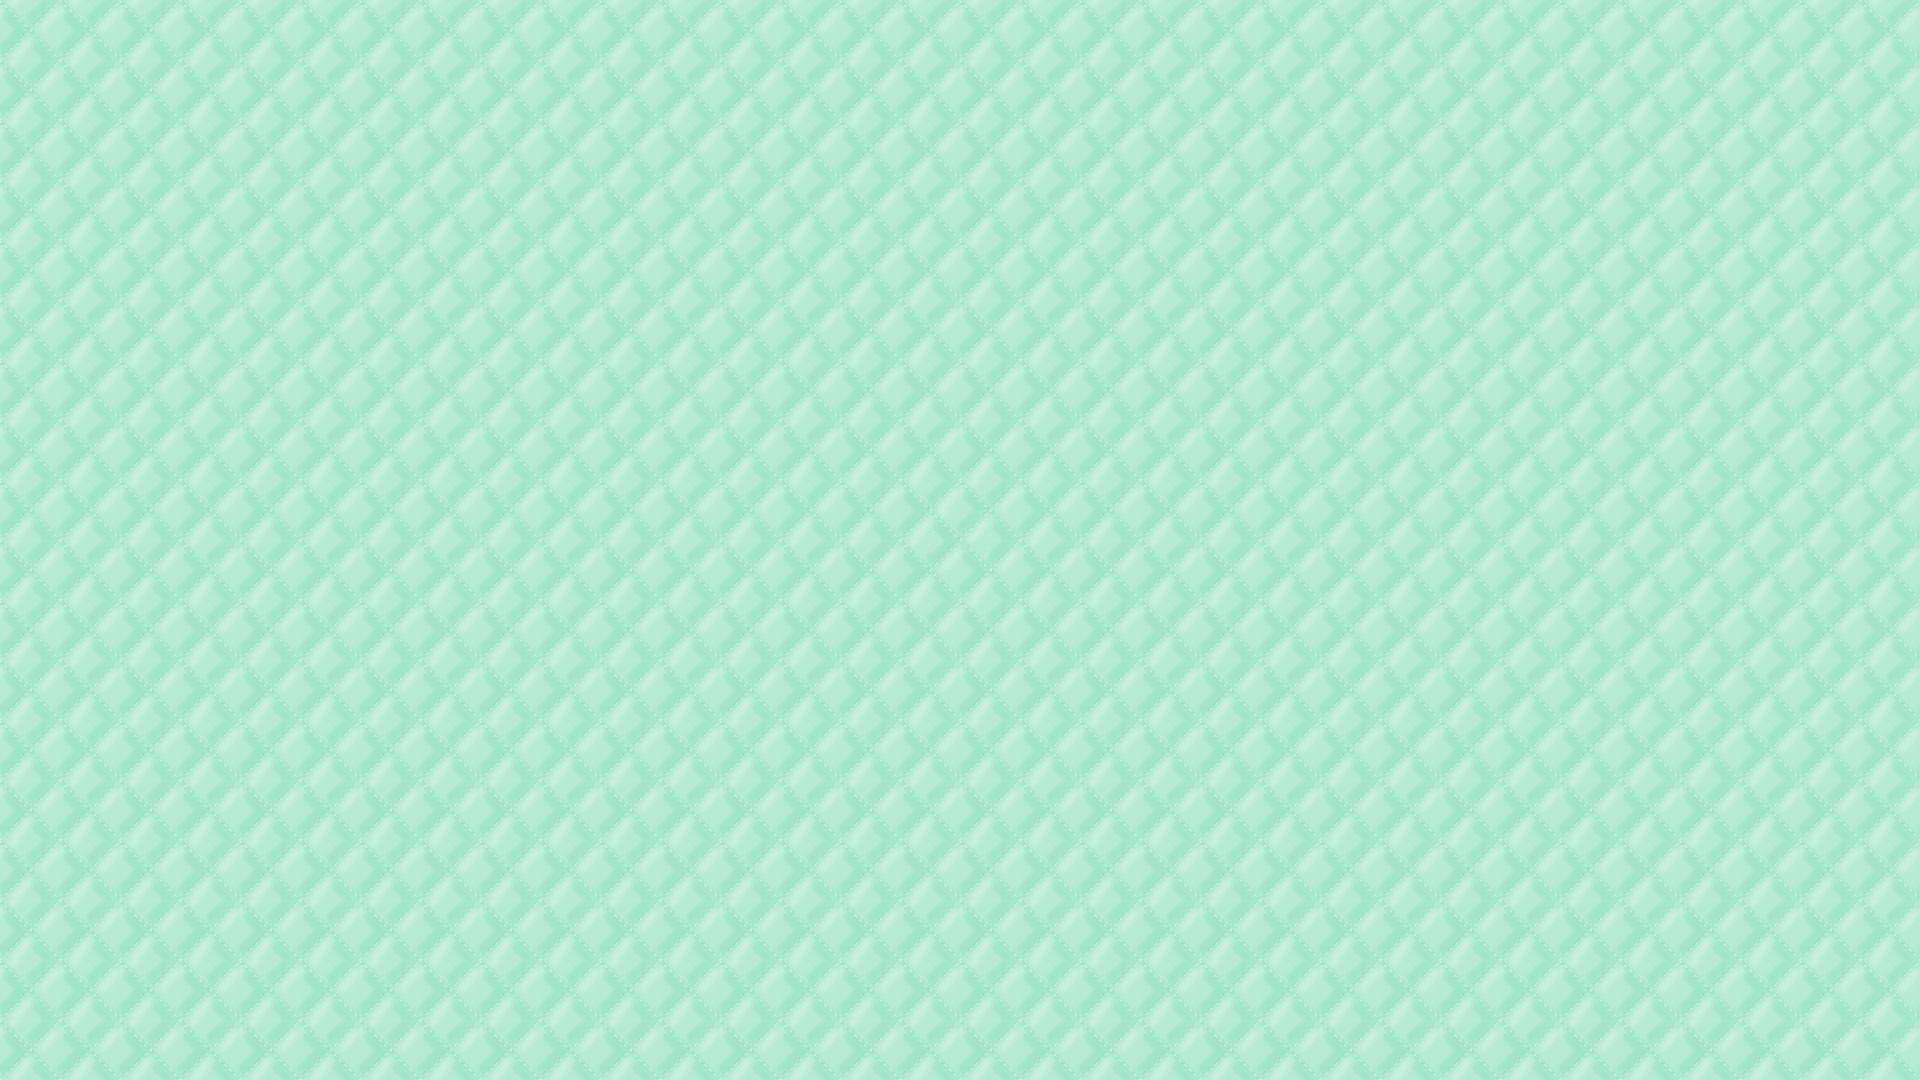 Mint Wallpaper, Image Collection of Mint